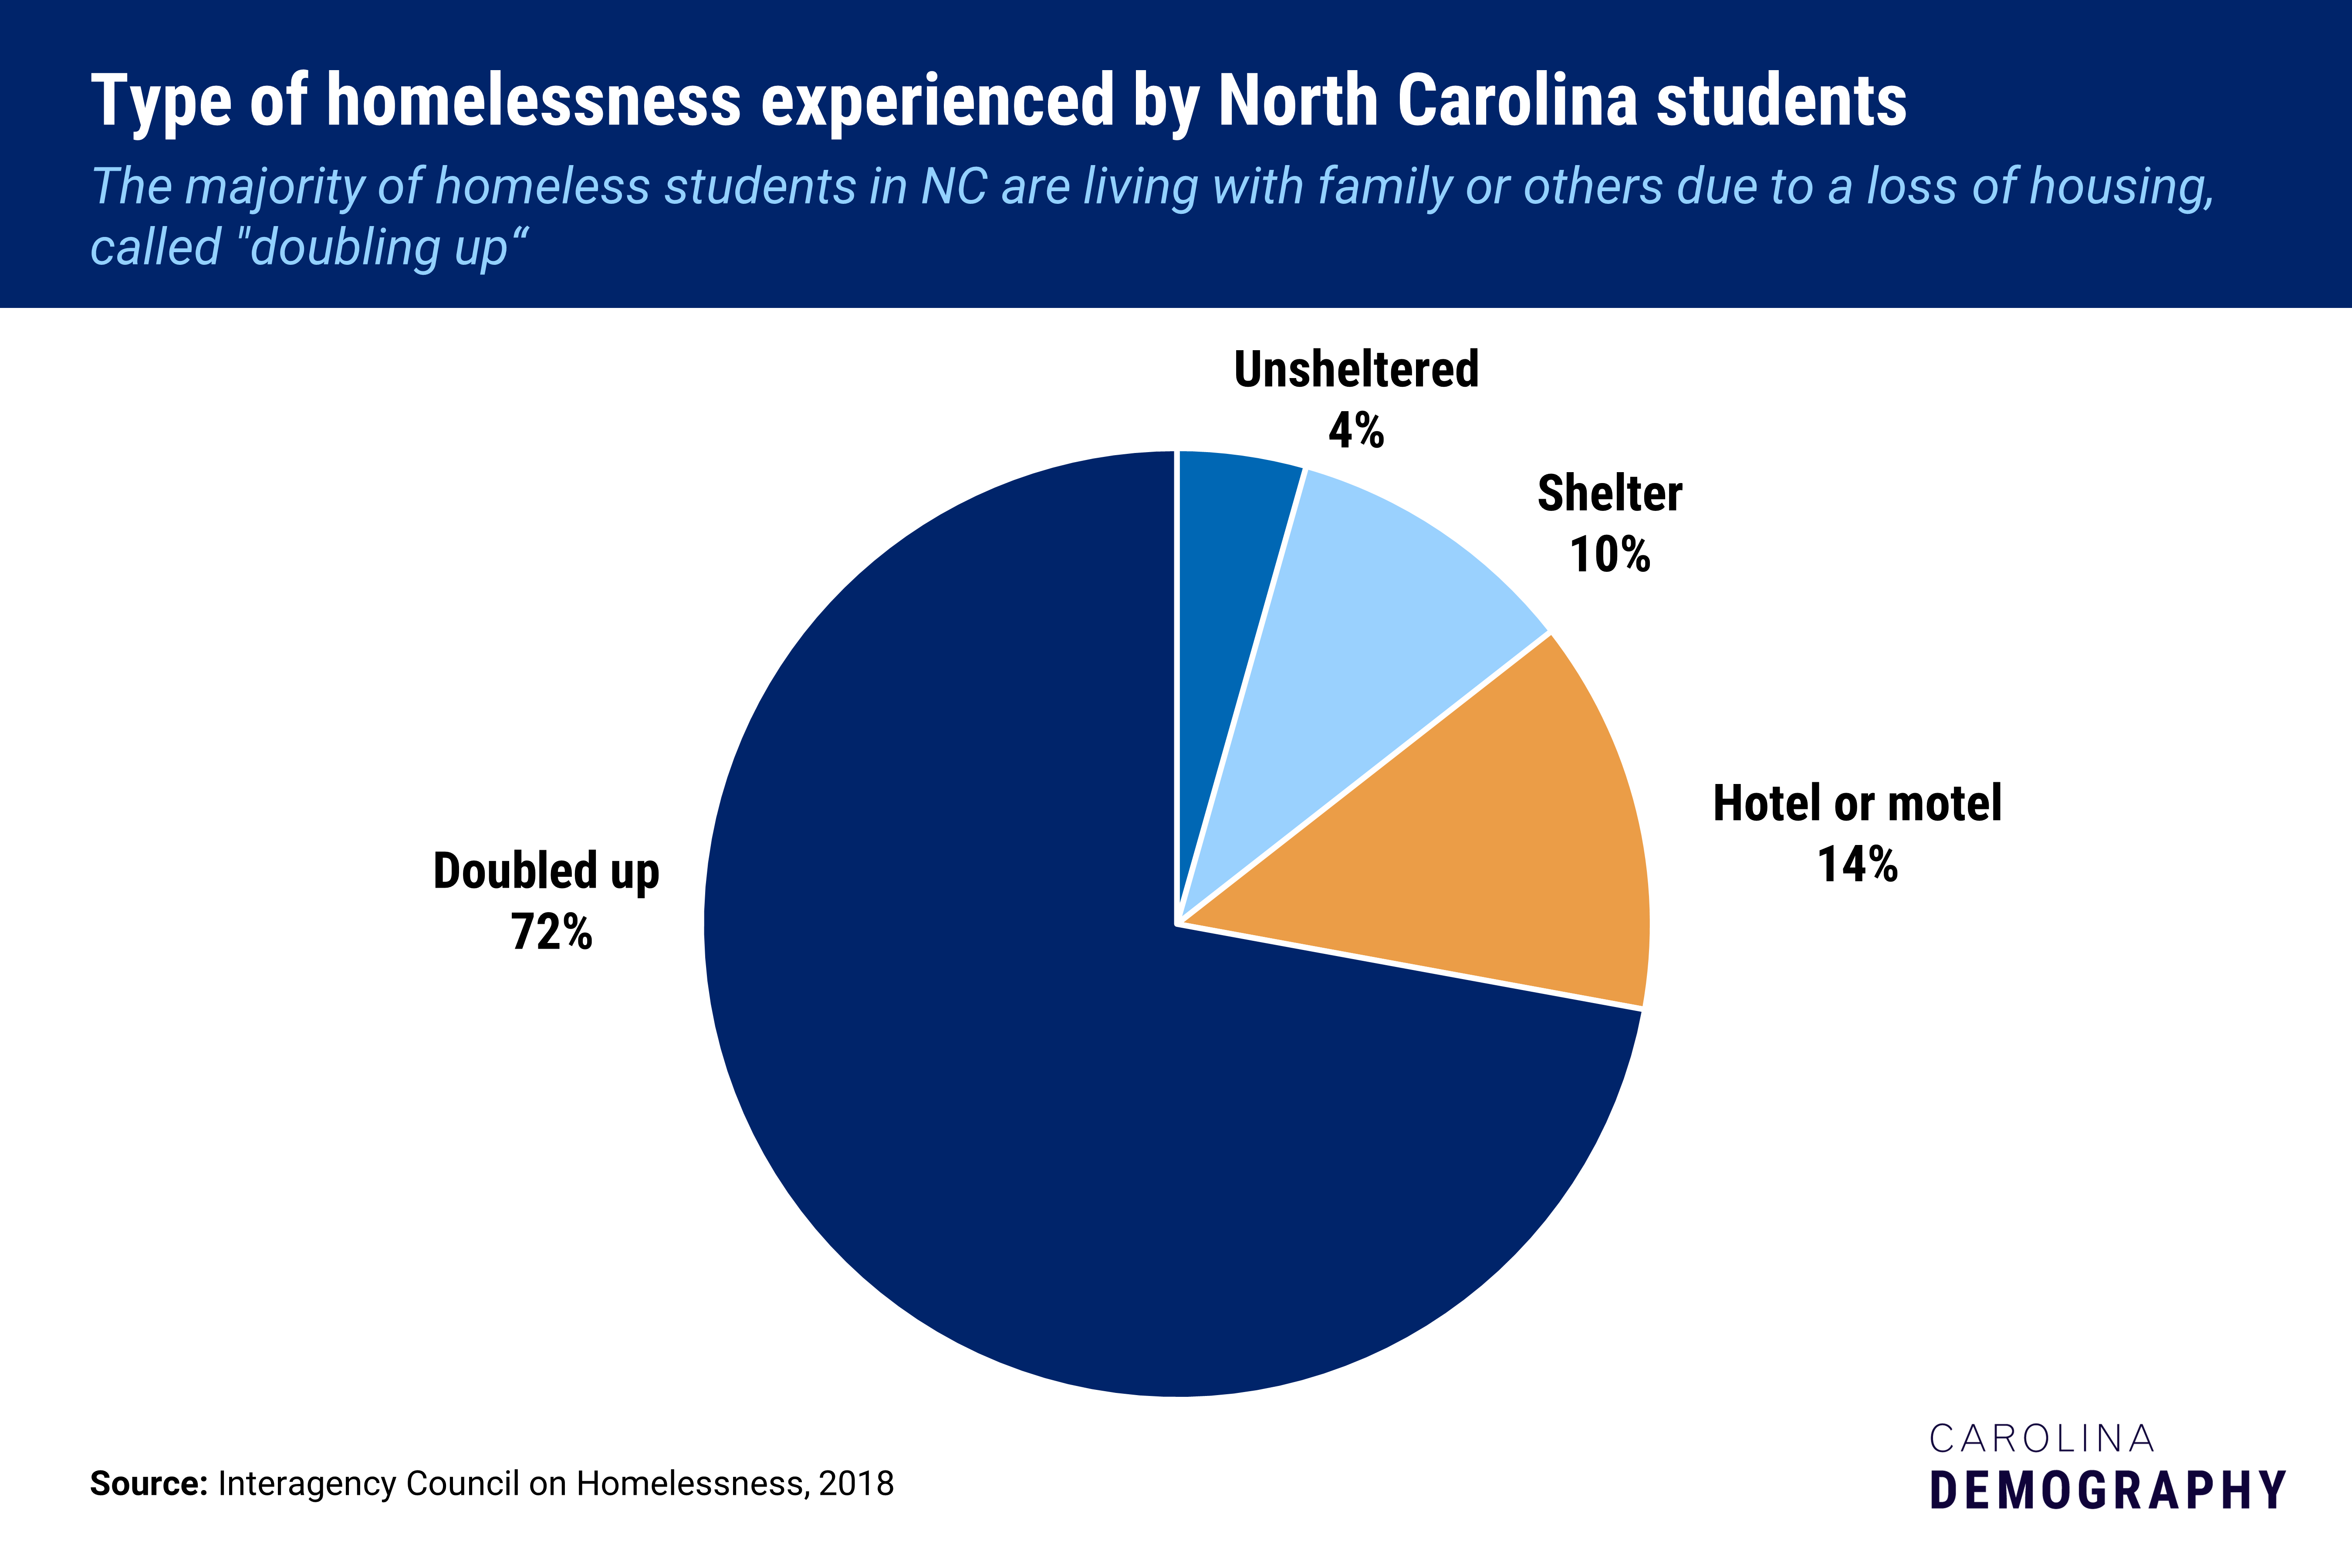 A pie chart showing that 72% of homeless students in NC are "doubled up."